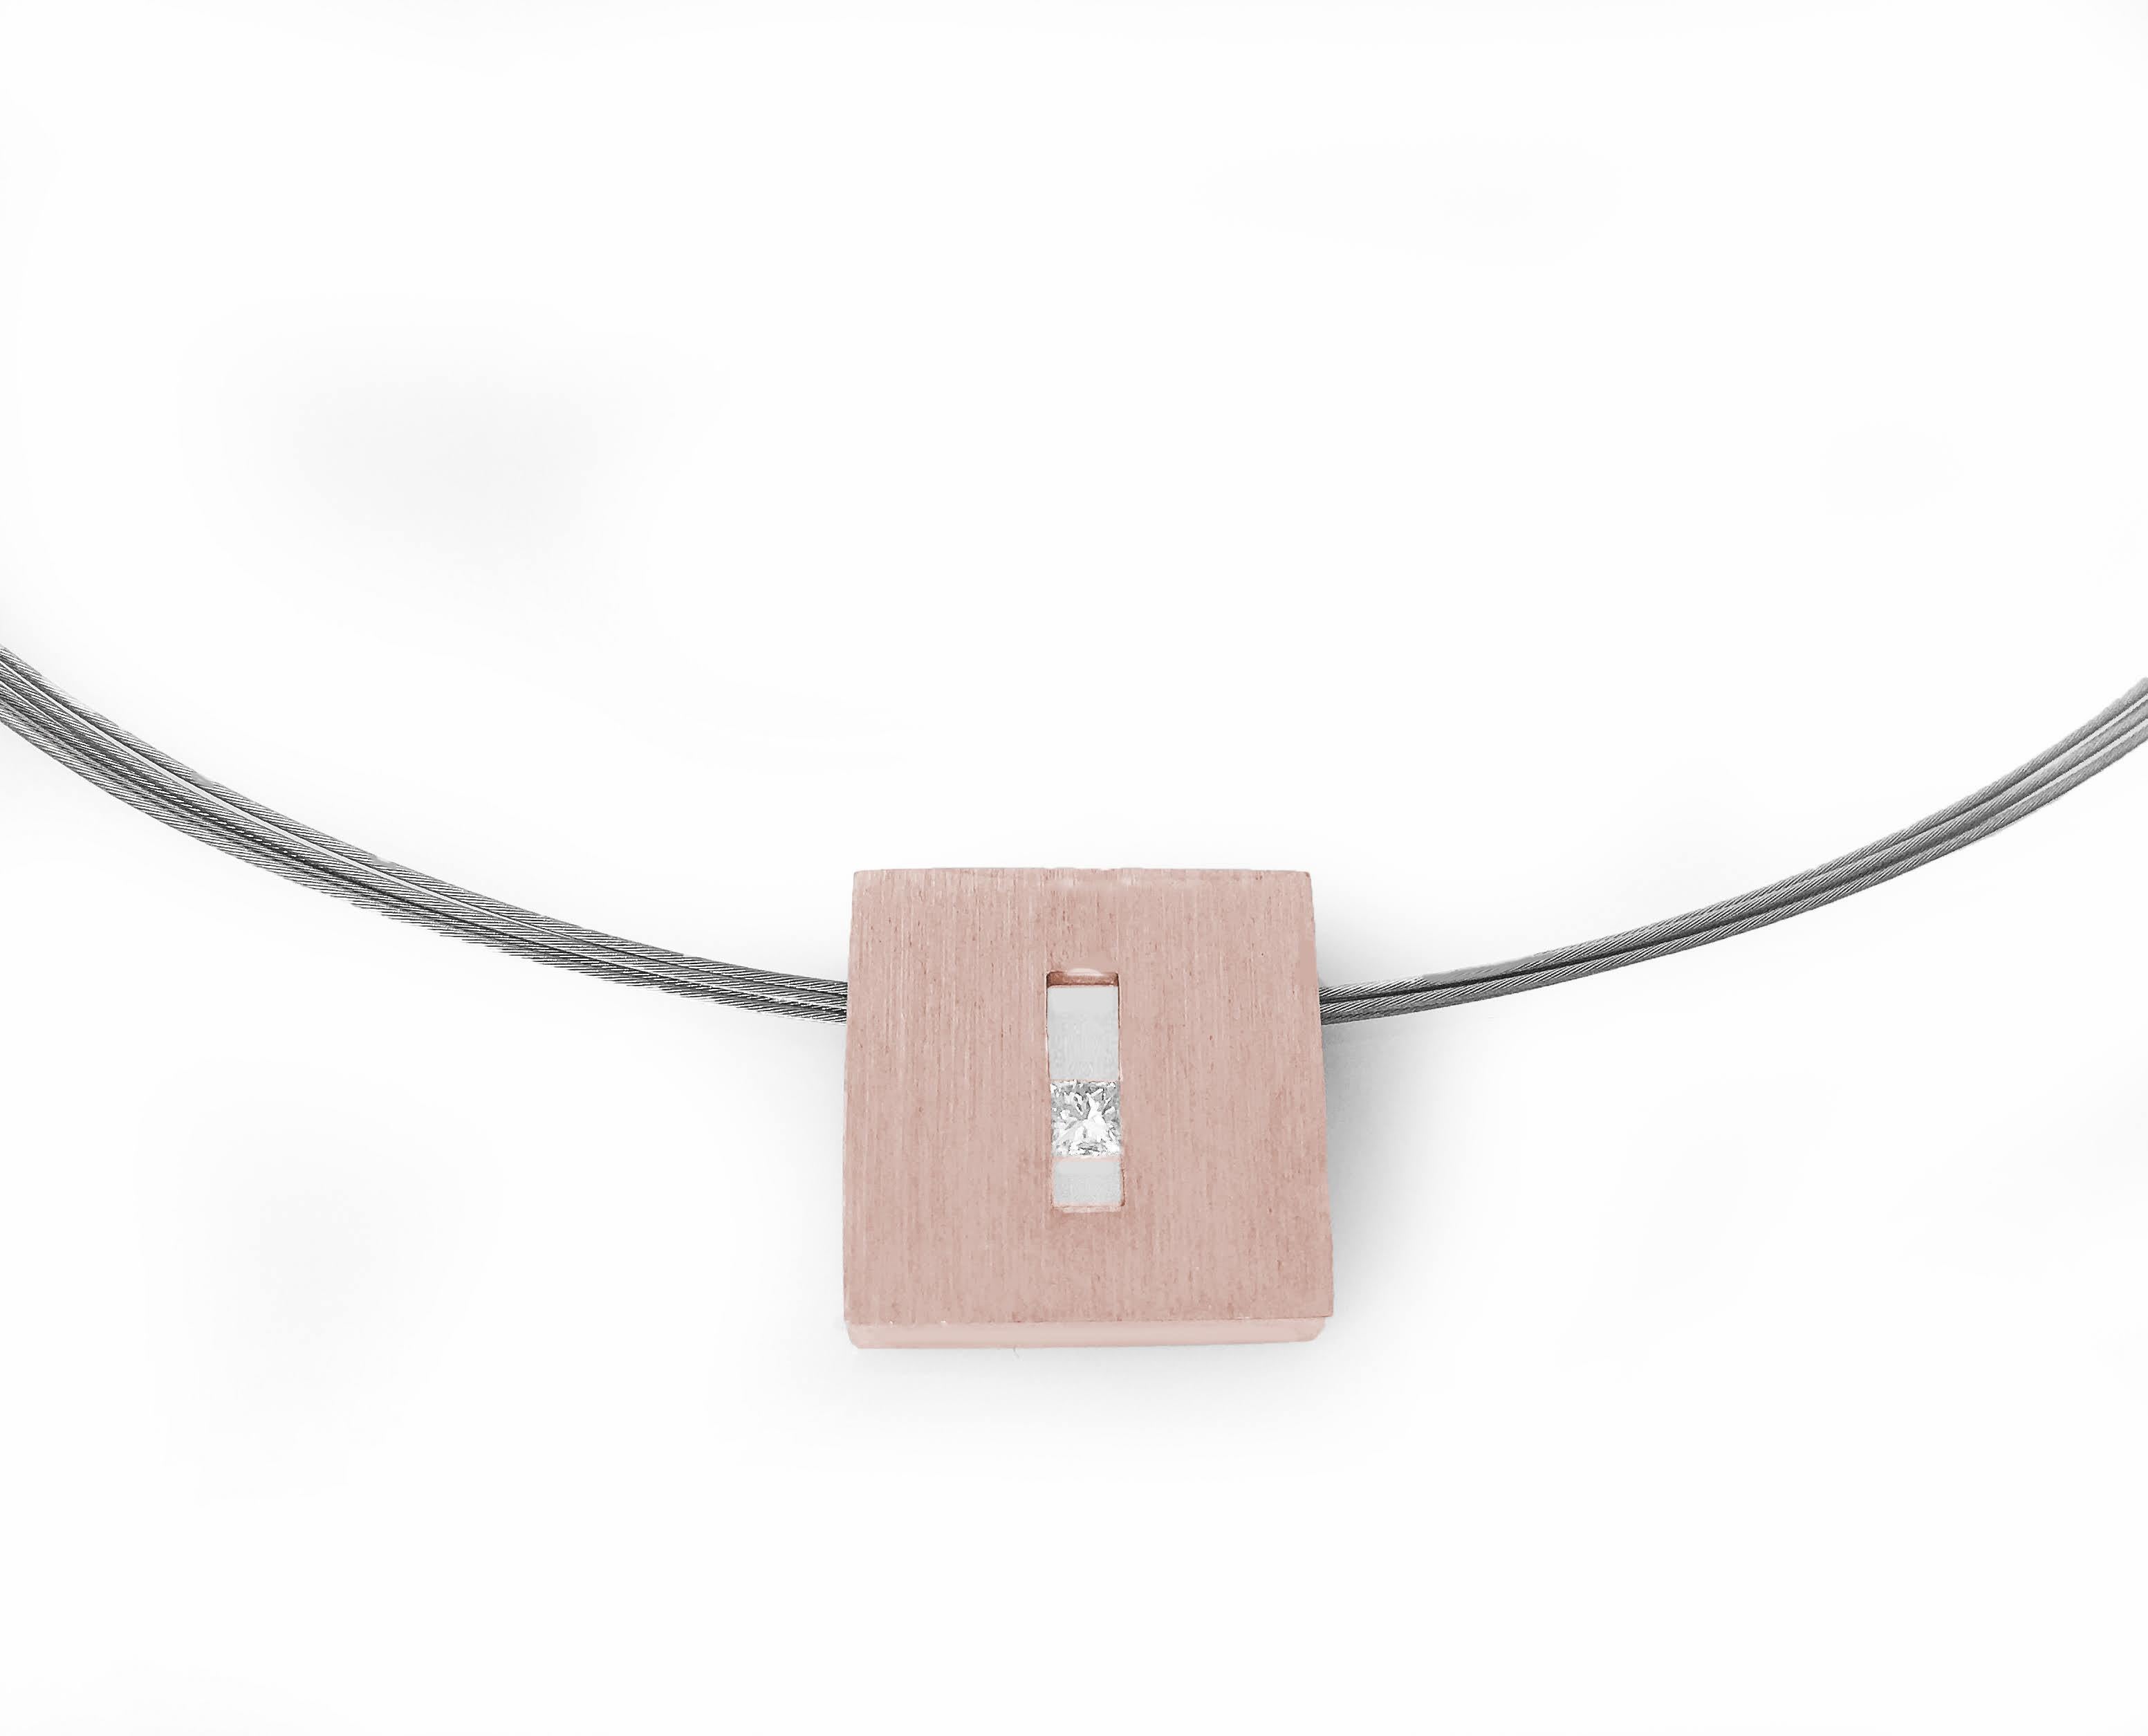 This Princess Diamond in Rose Gold Suspended Square Pendant with Princess Diamond is part of our Suspension Collection. Modern and architecturally inspired, this square pendant is shown in rose gold with a brushed finish and set off center with an